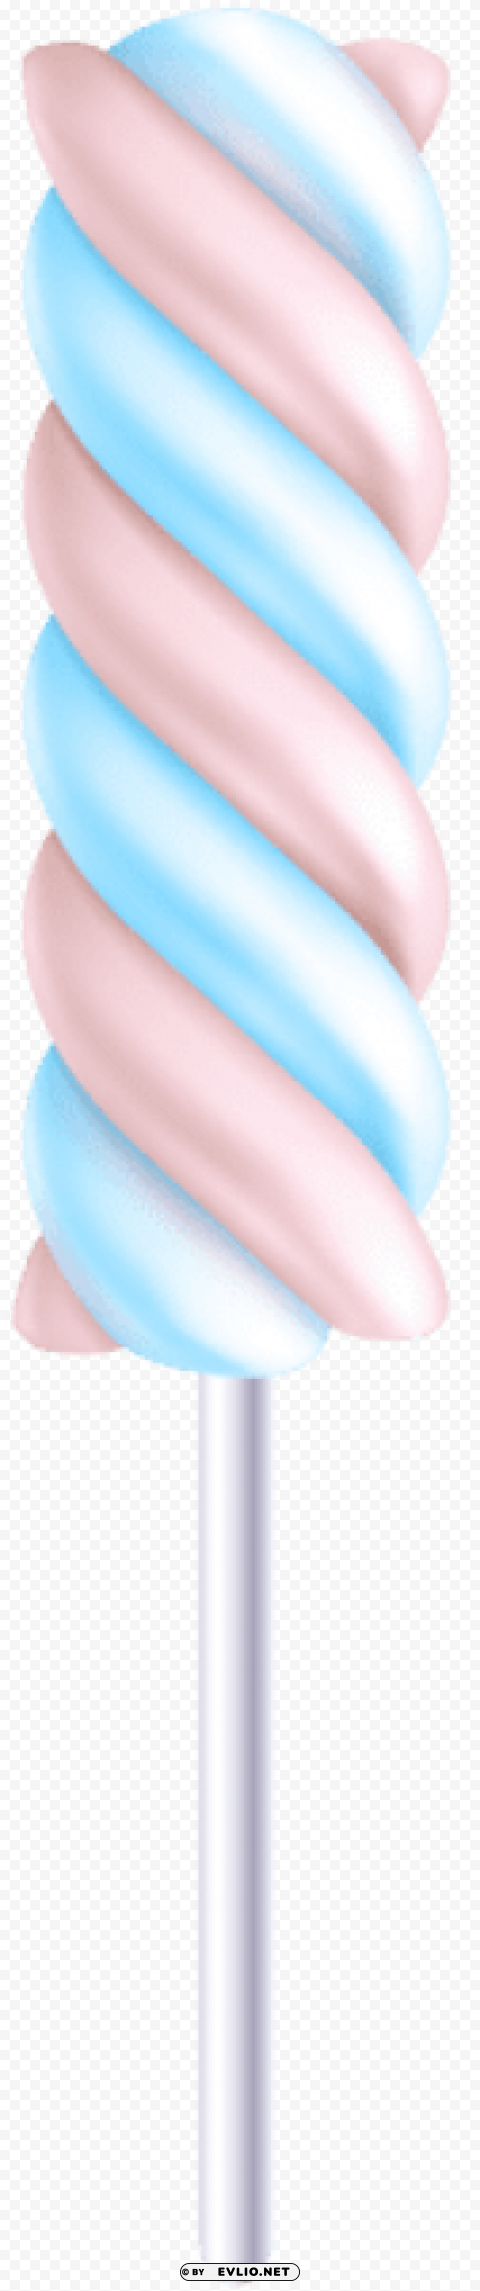 marshmallow lollipop Isolated Subject with Transparent PNG